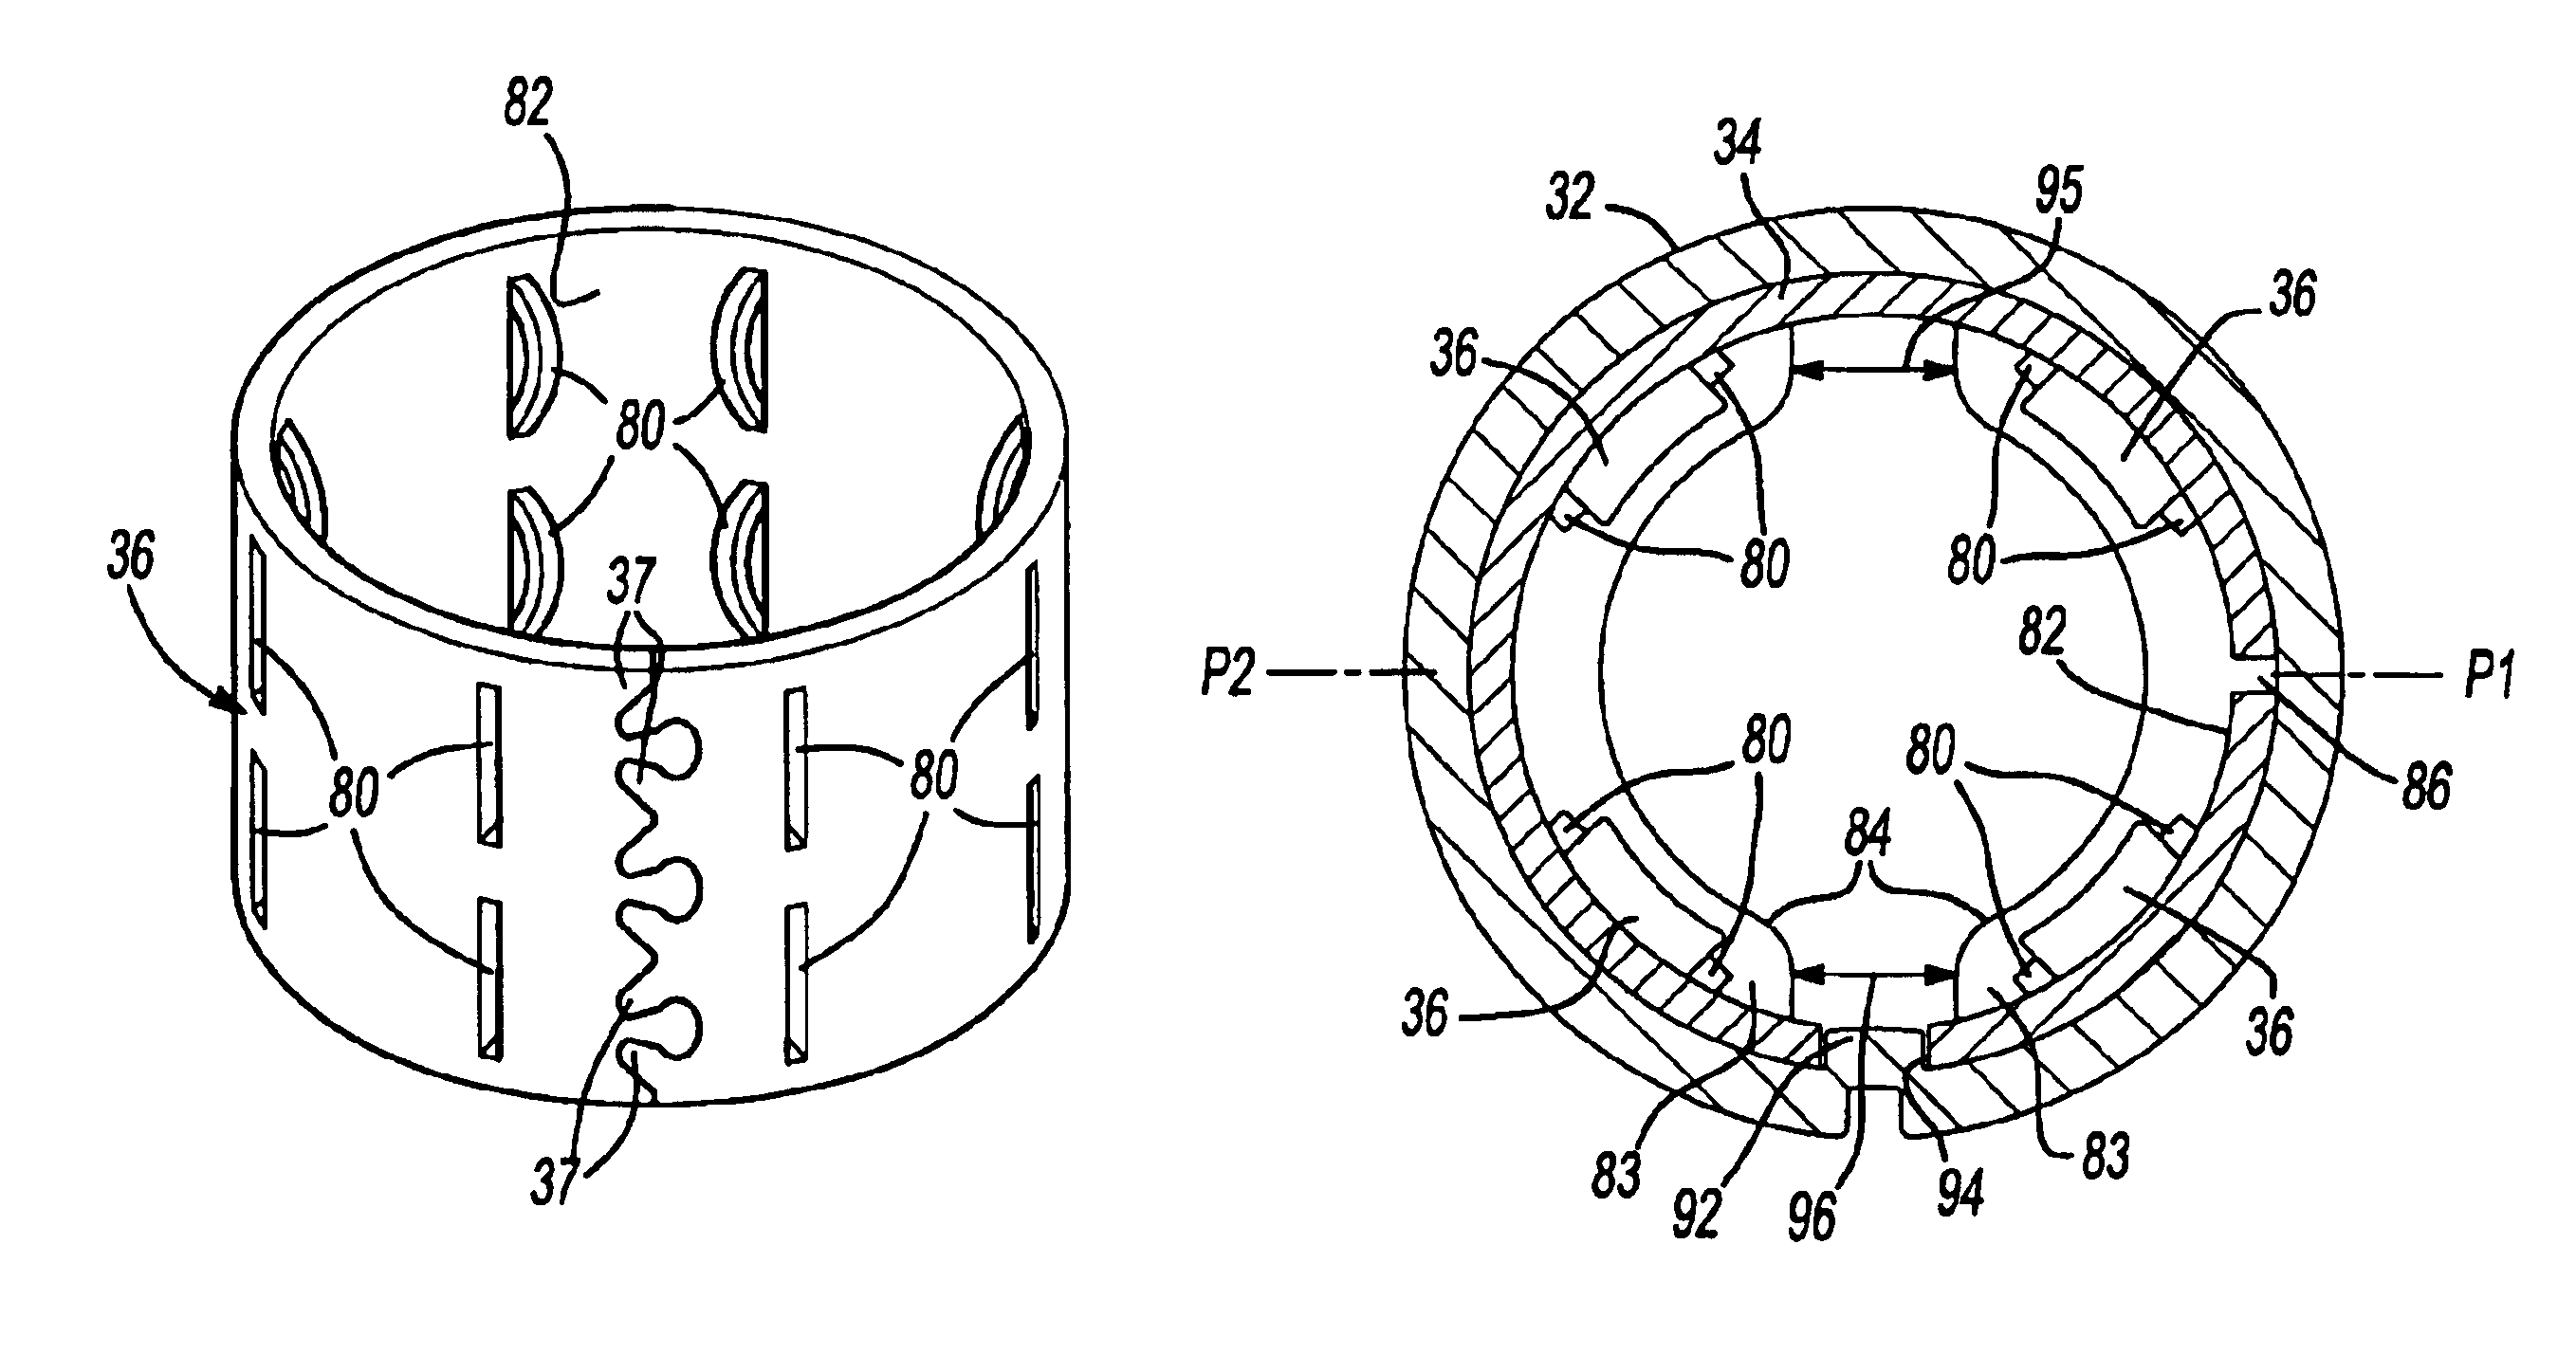 Stator assembly with an overmolding that secures magnets to a flux ring and the flux ring to a stator housing